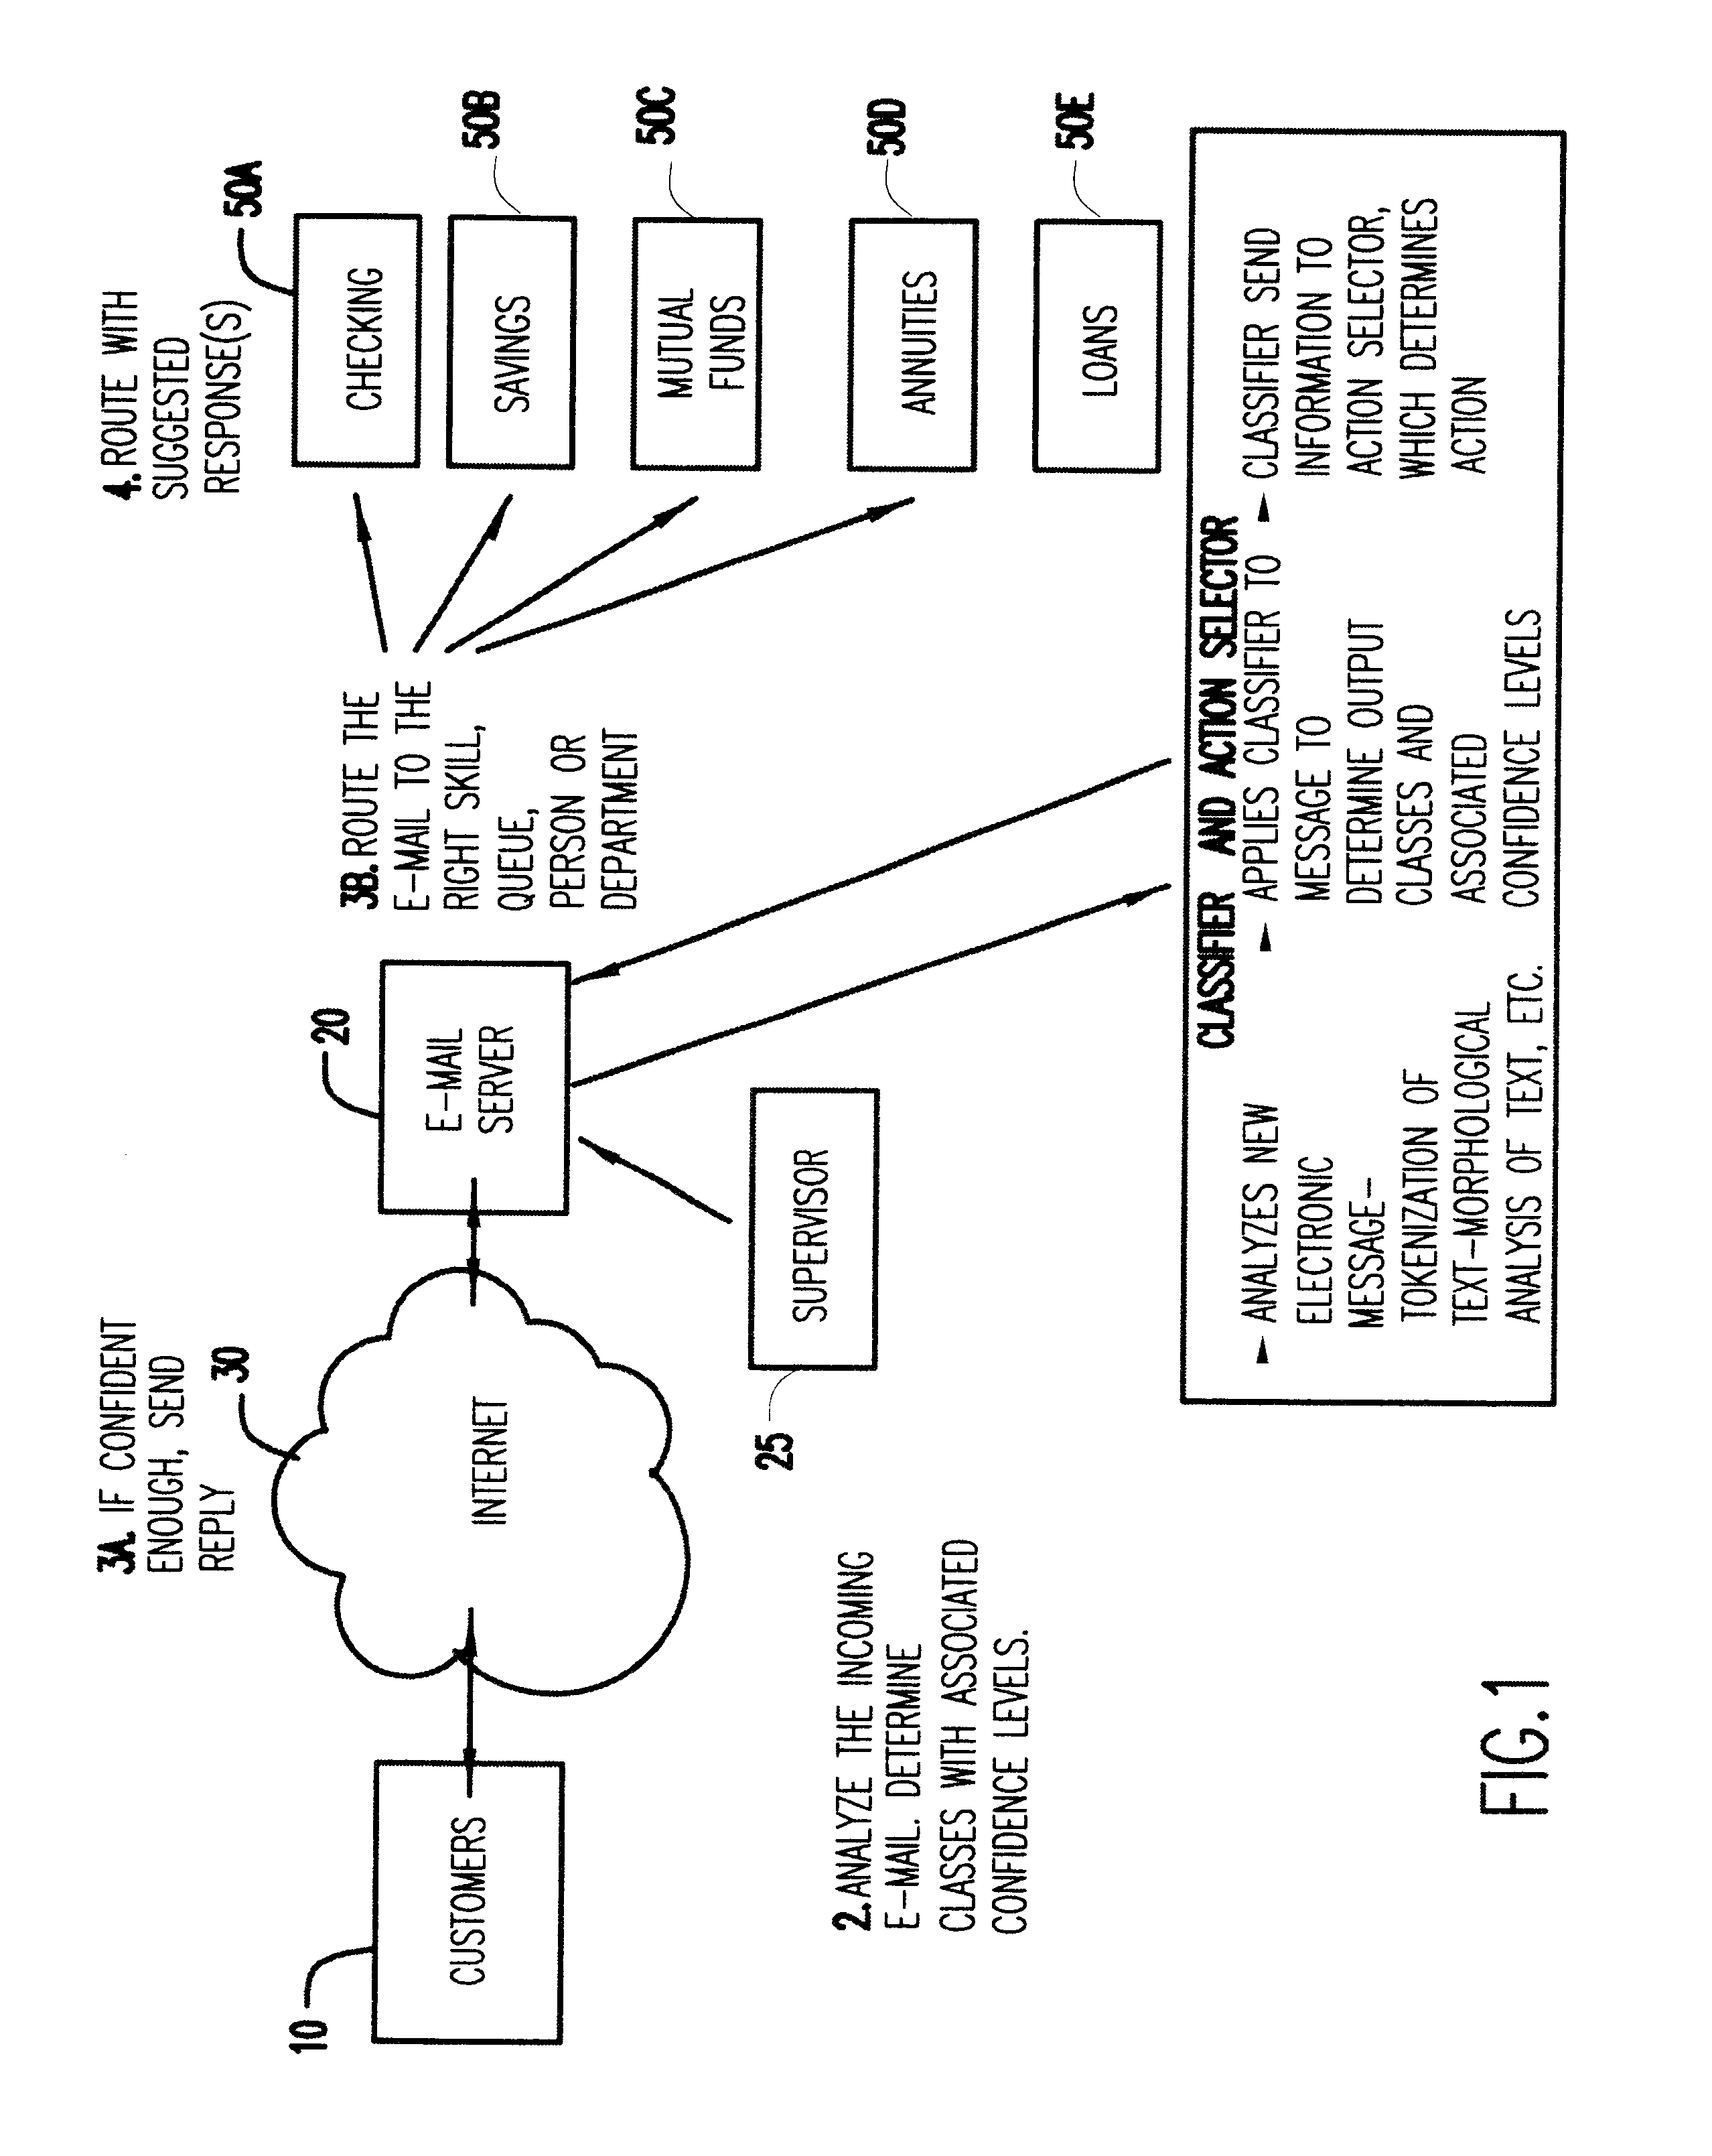 Machine learning based electronic messaging system